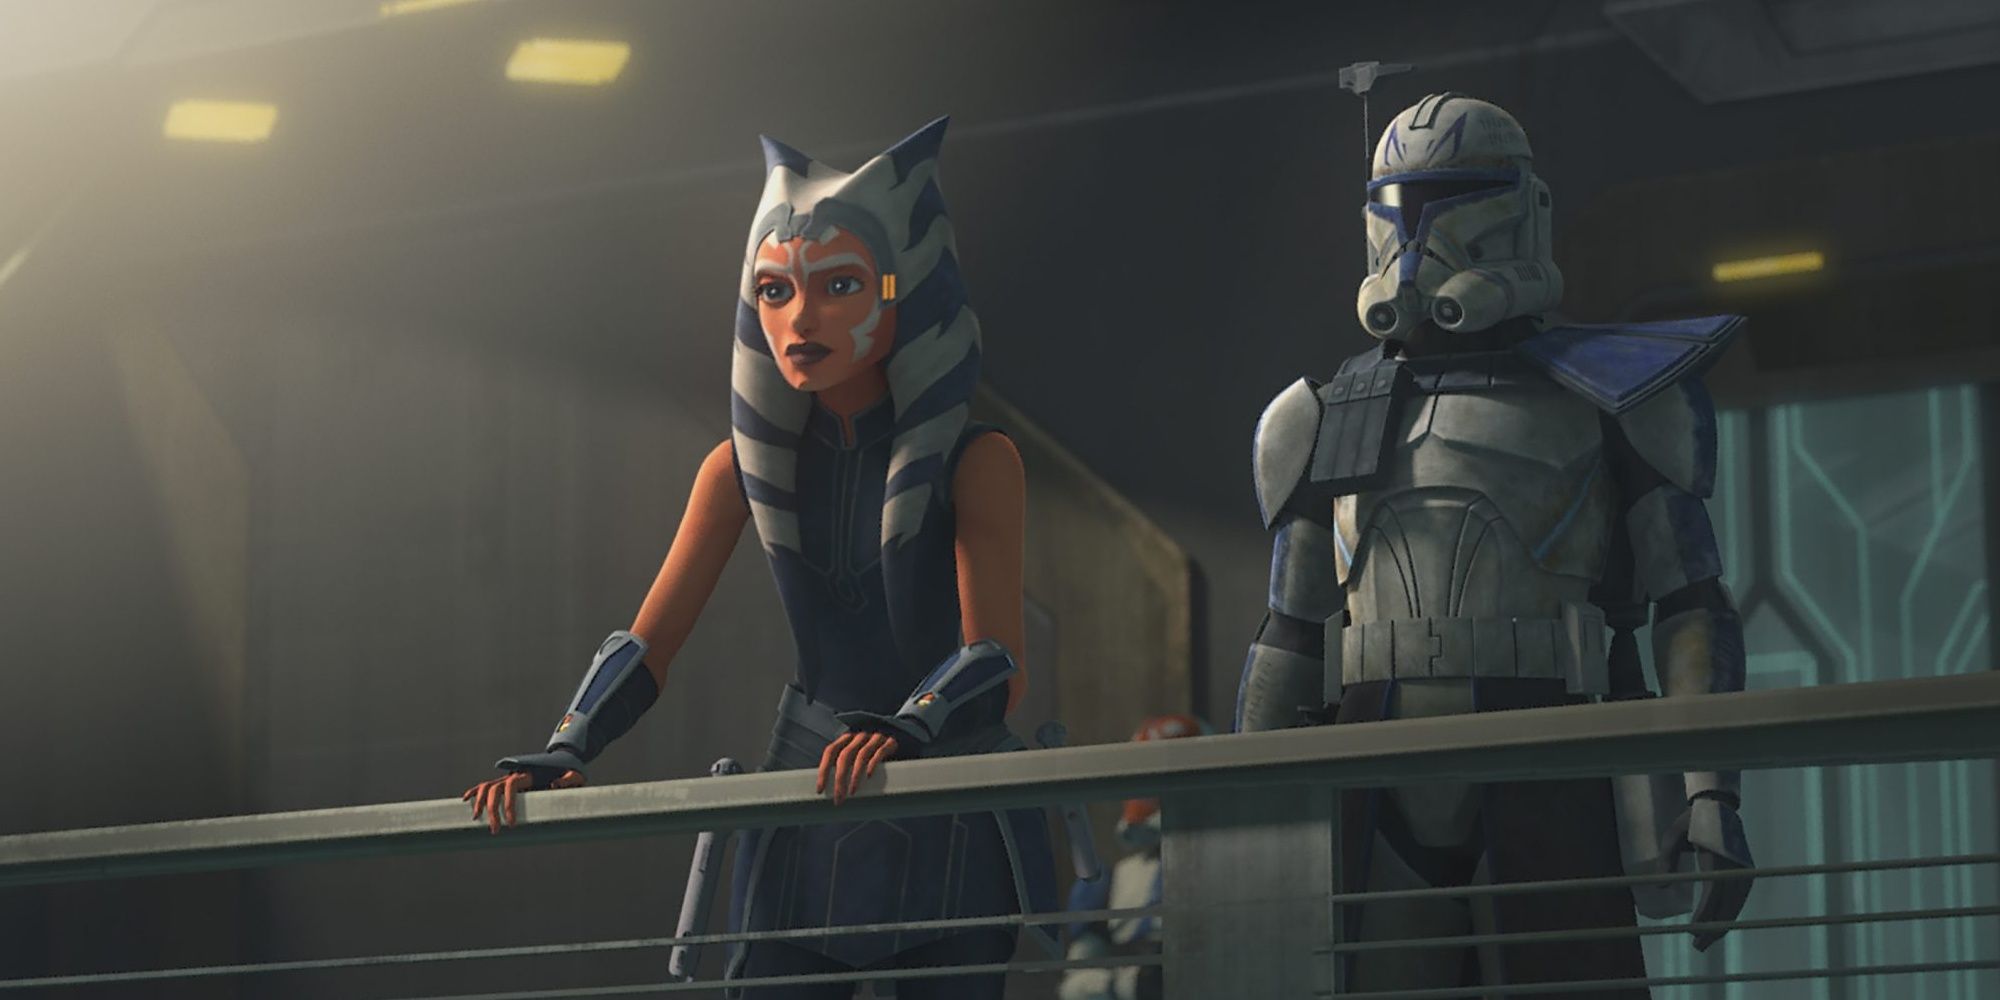 Rex and Ahsoka look out on the clones who are ready to kill them due to Order 66 in The Clone Wars